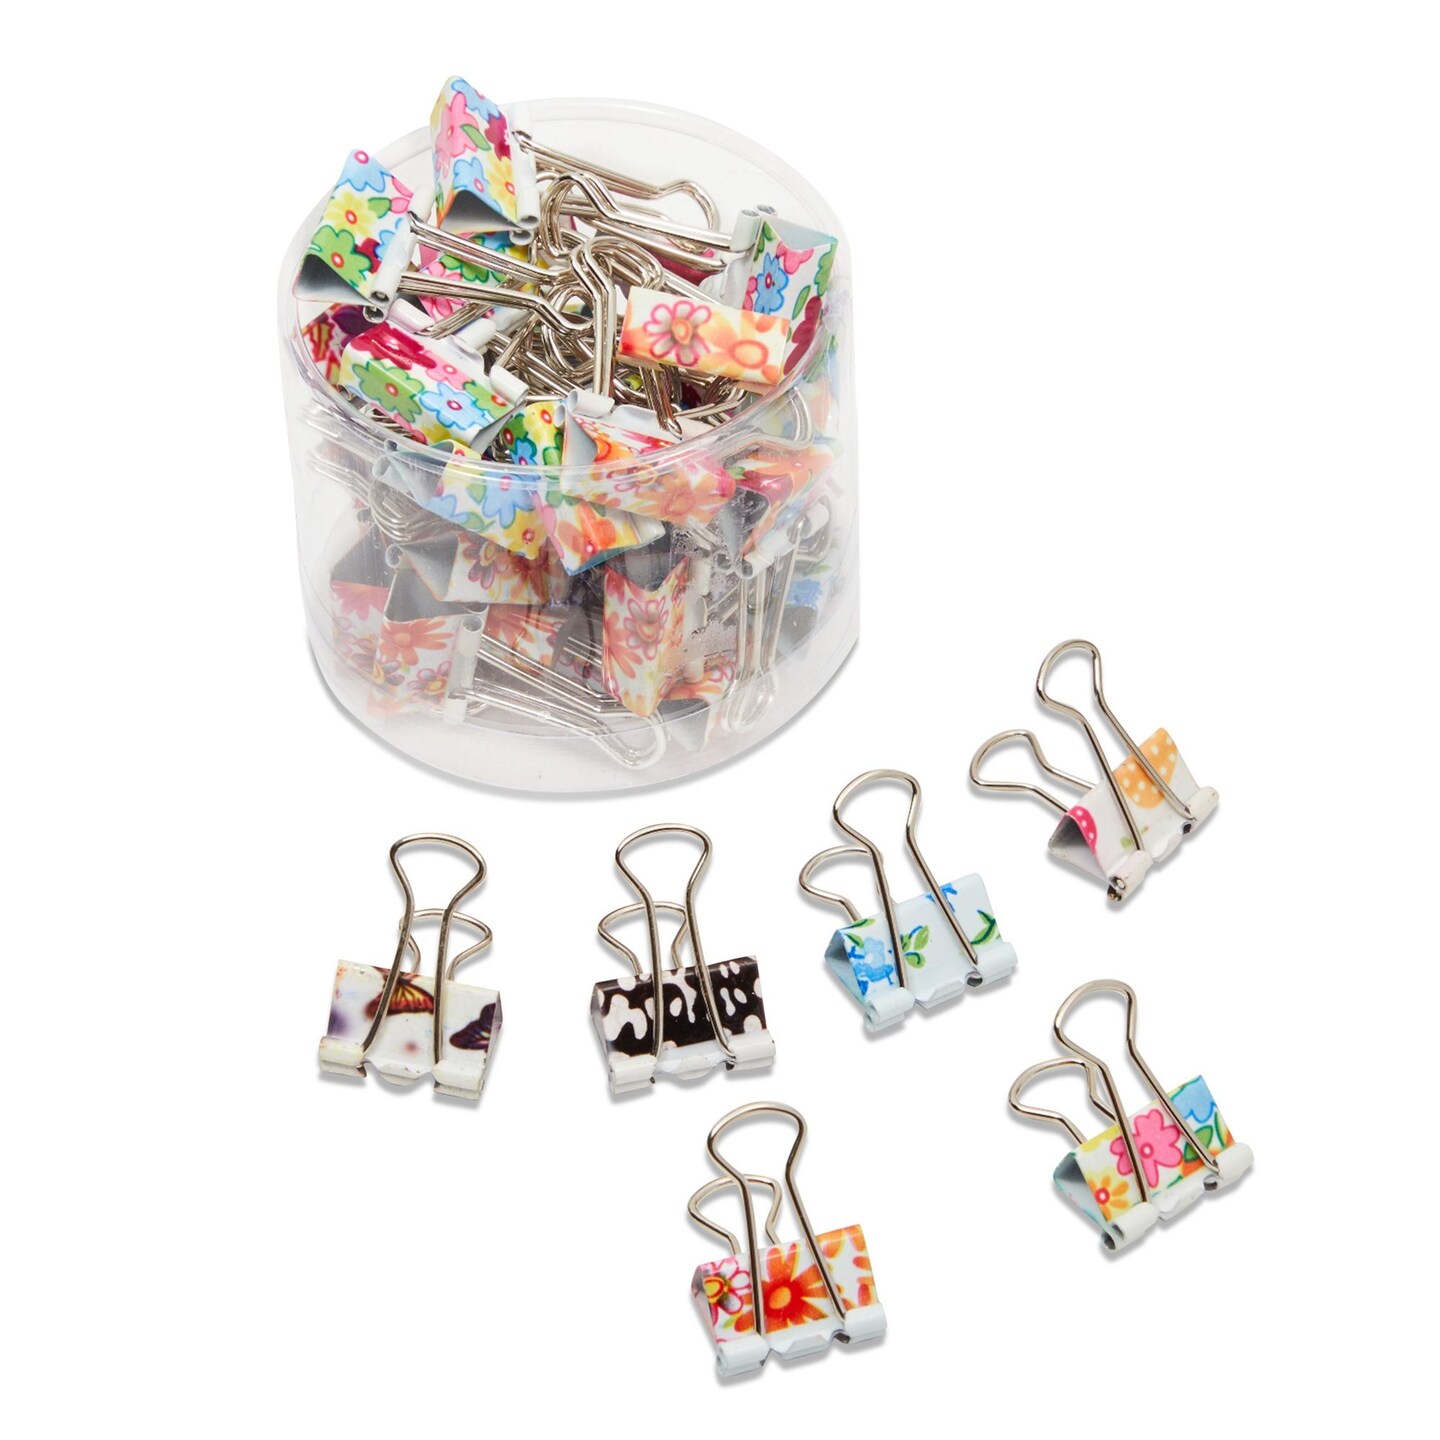 40 Pack Cute Binder Clips for Paper, Notebooks, Planners, File